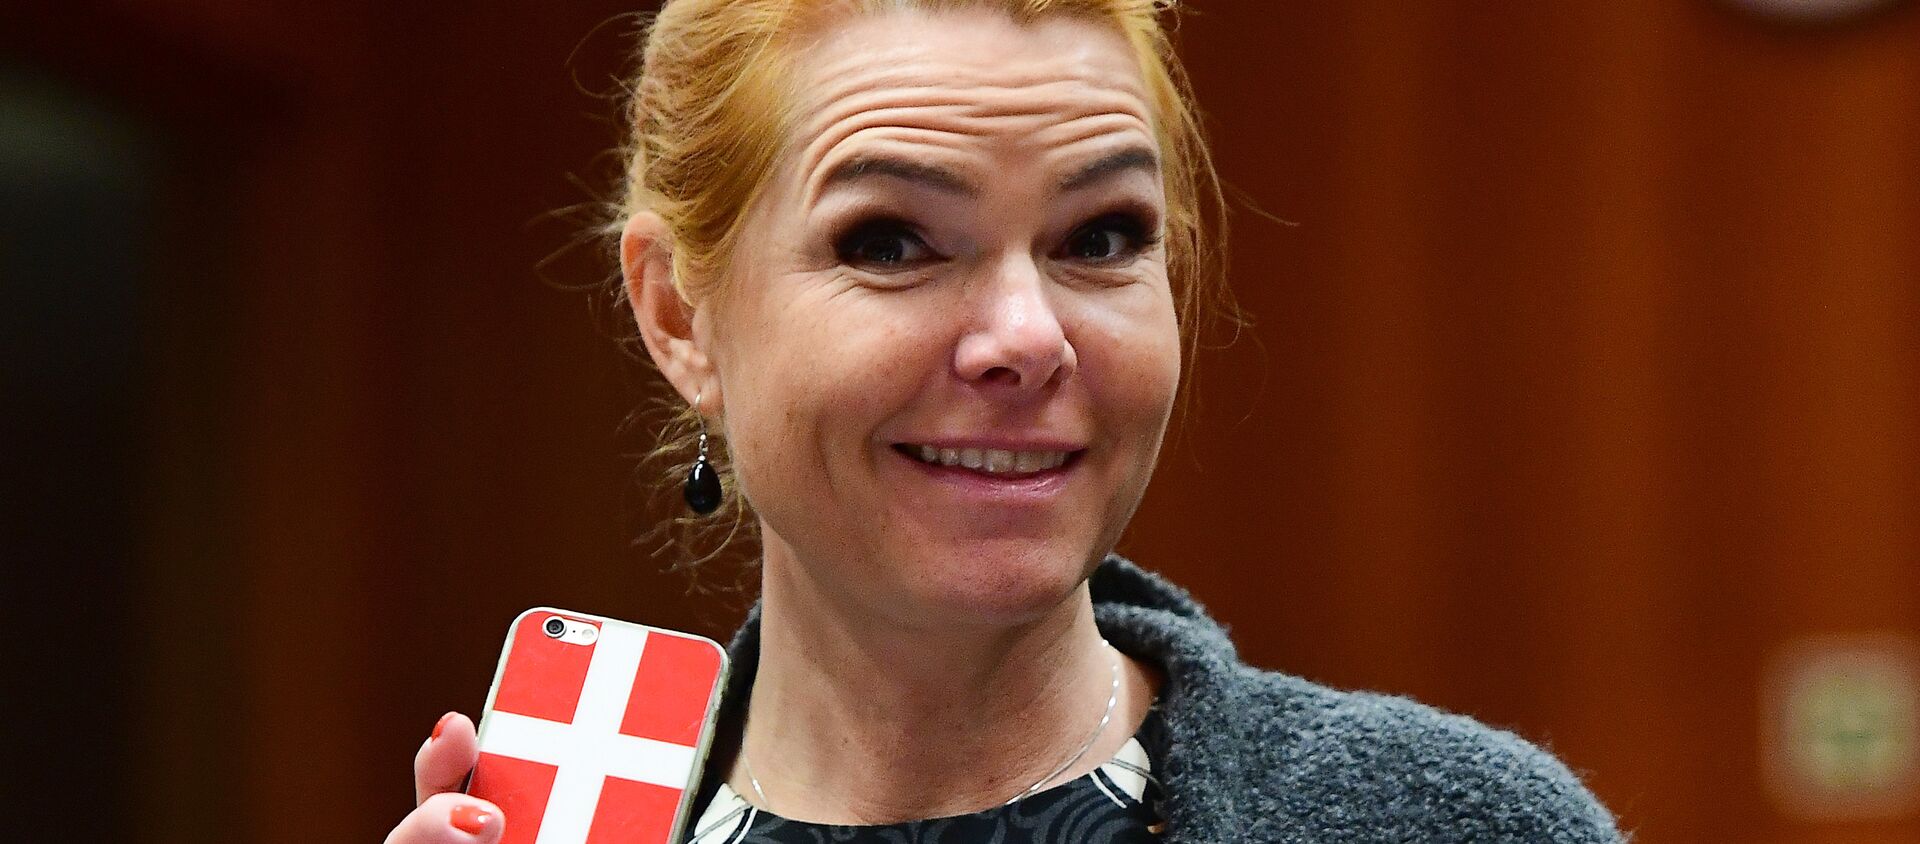 Danish Interior Minister Inger Stojberg holds her phone showing a Danish flags as she attends a Justice and Home Affairs Council at the European Council in Brussels on 18 November 2016 - Sputnik International, 1920, 03.09.2021